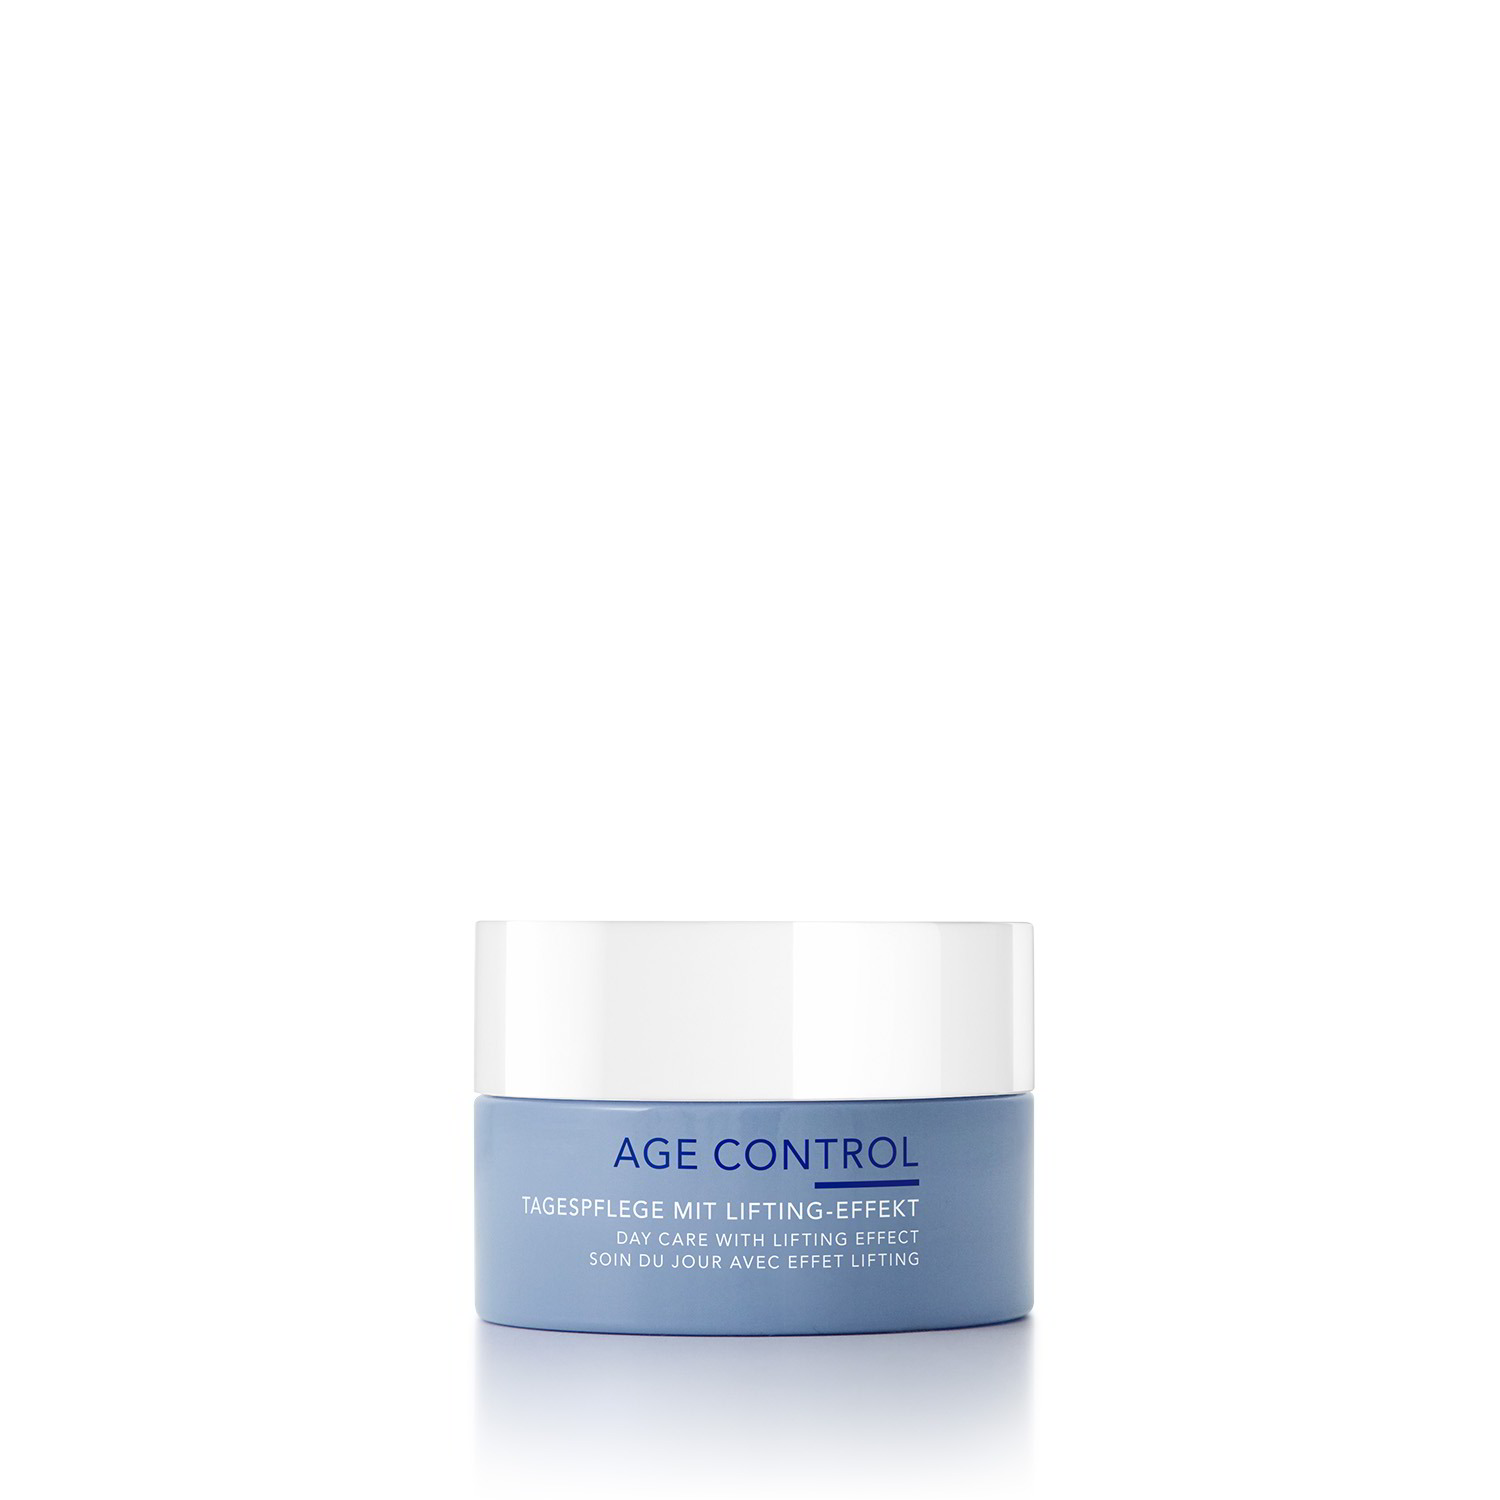 Age Control Day Care With Lifting Effect